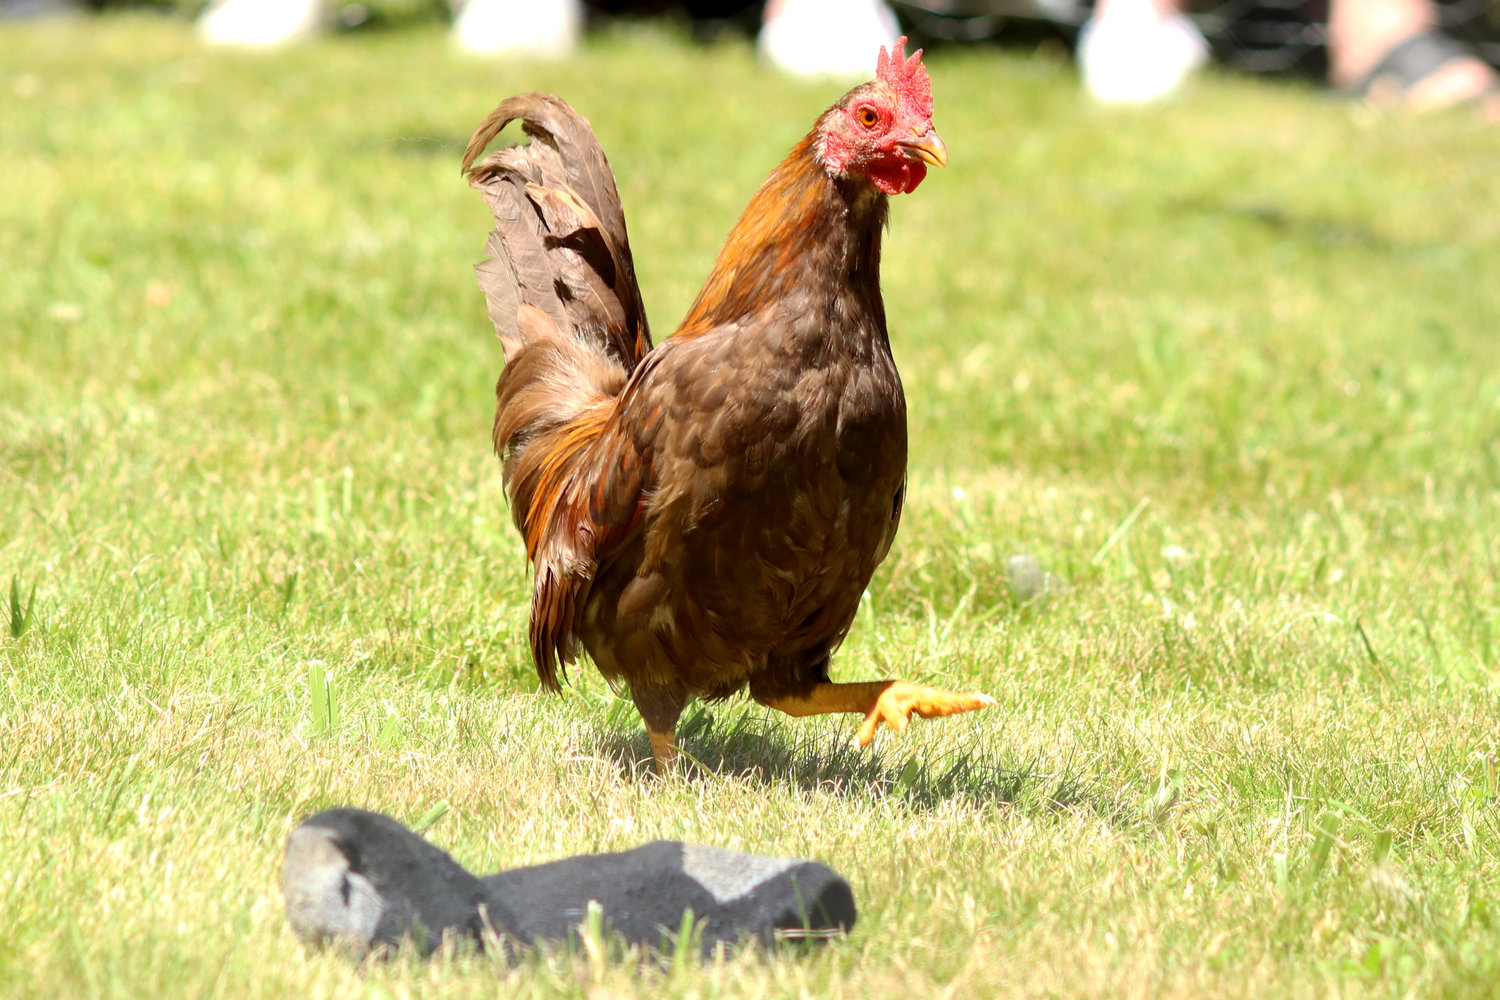 A chicken ignores a sock intended to encourage it to run during Independence Valley Community Hall’s 42nd Annual Chicken Races in Rochester on Sunday.